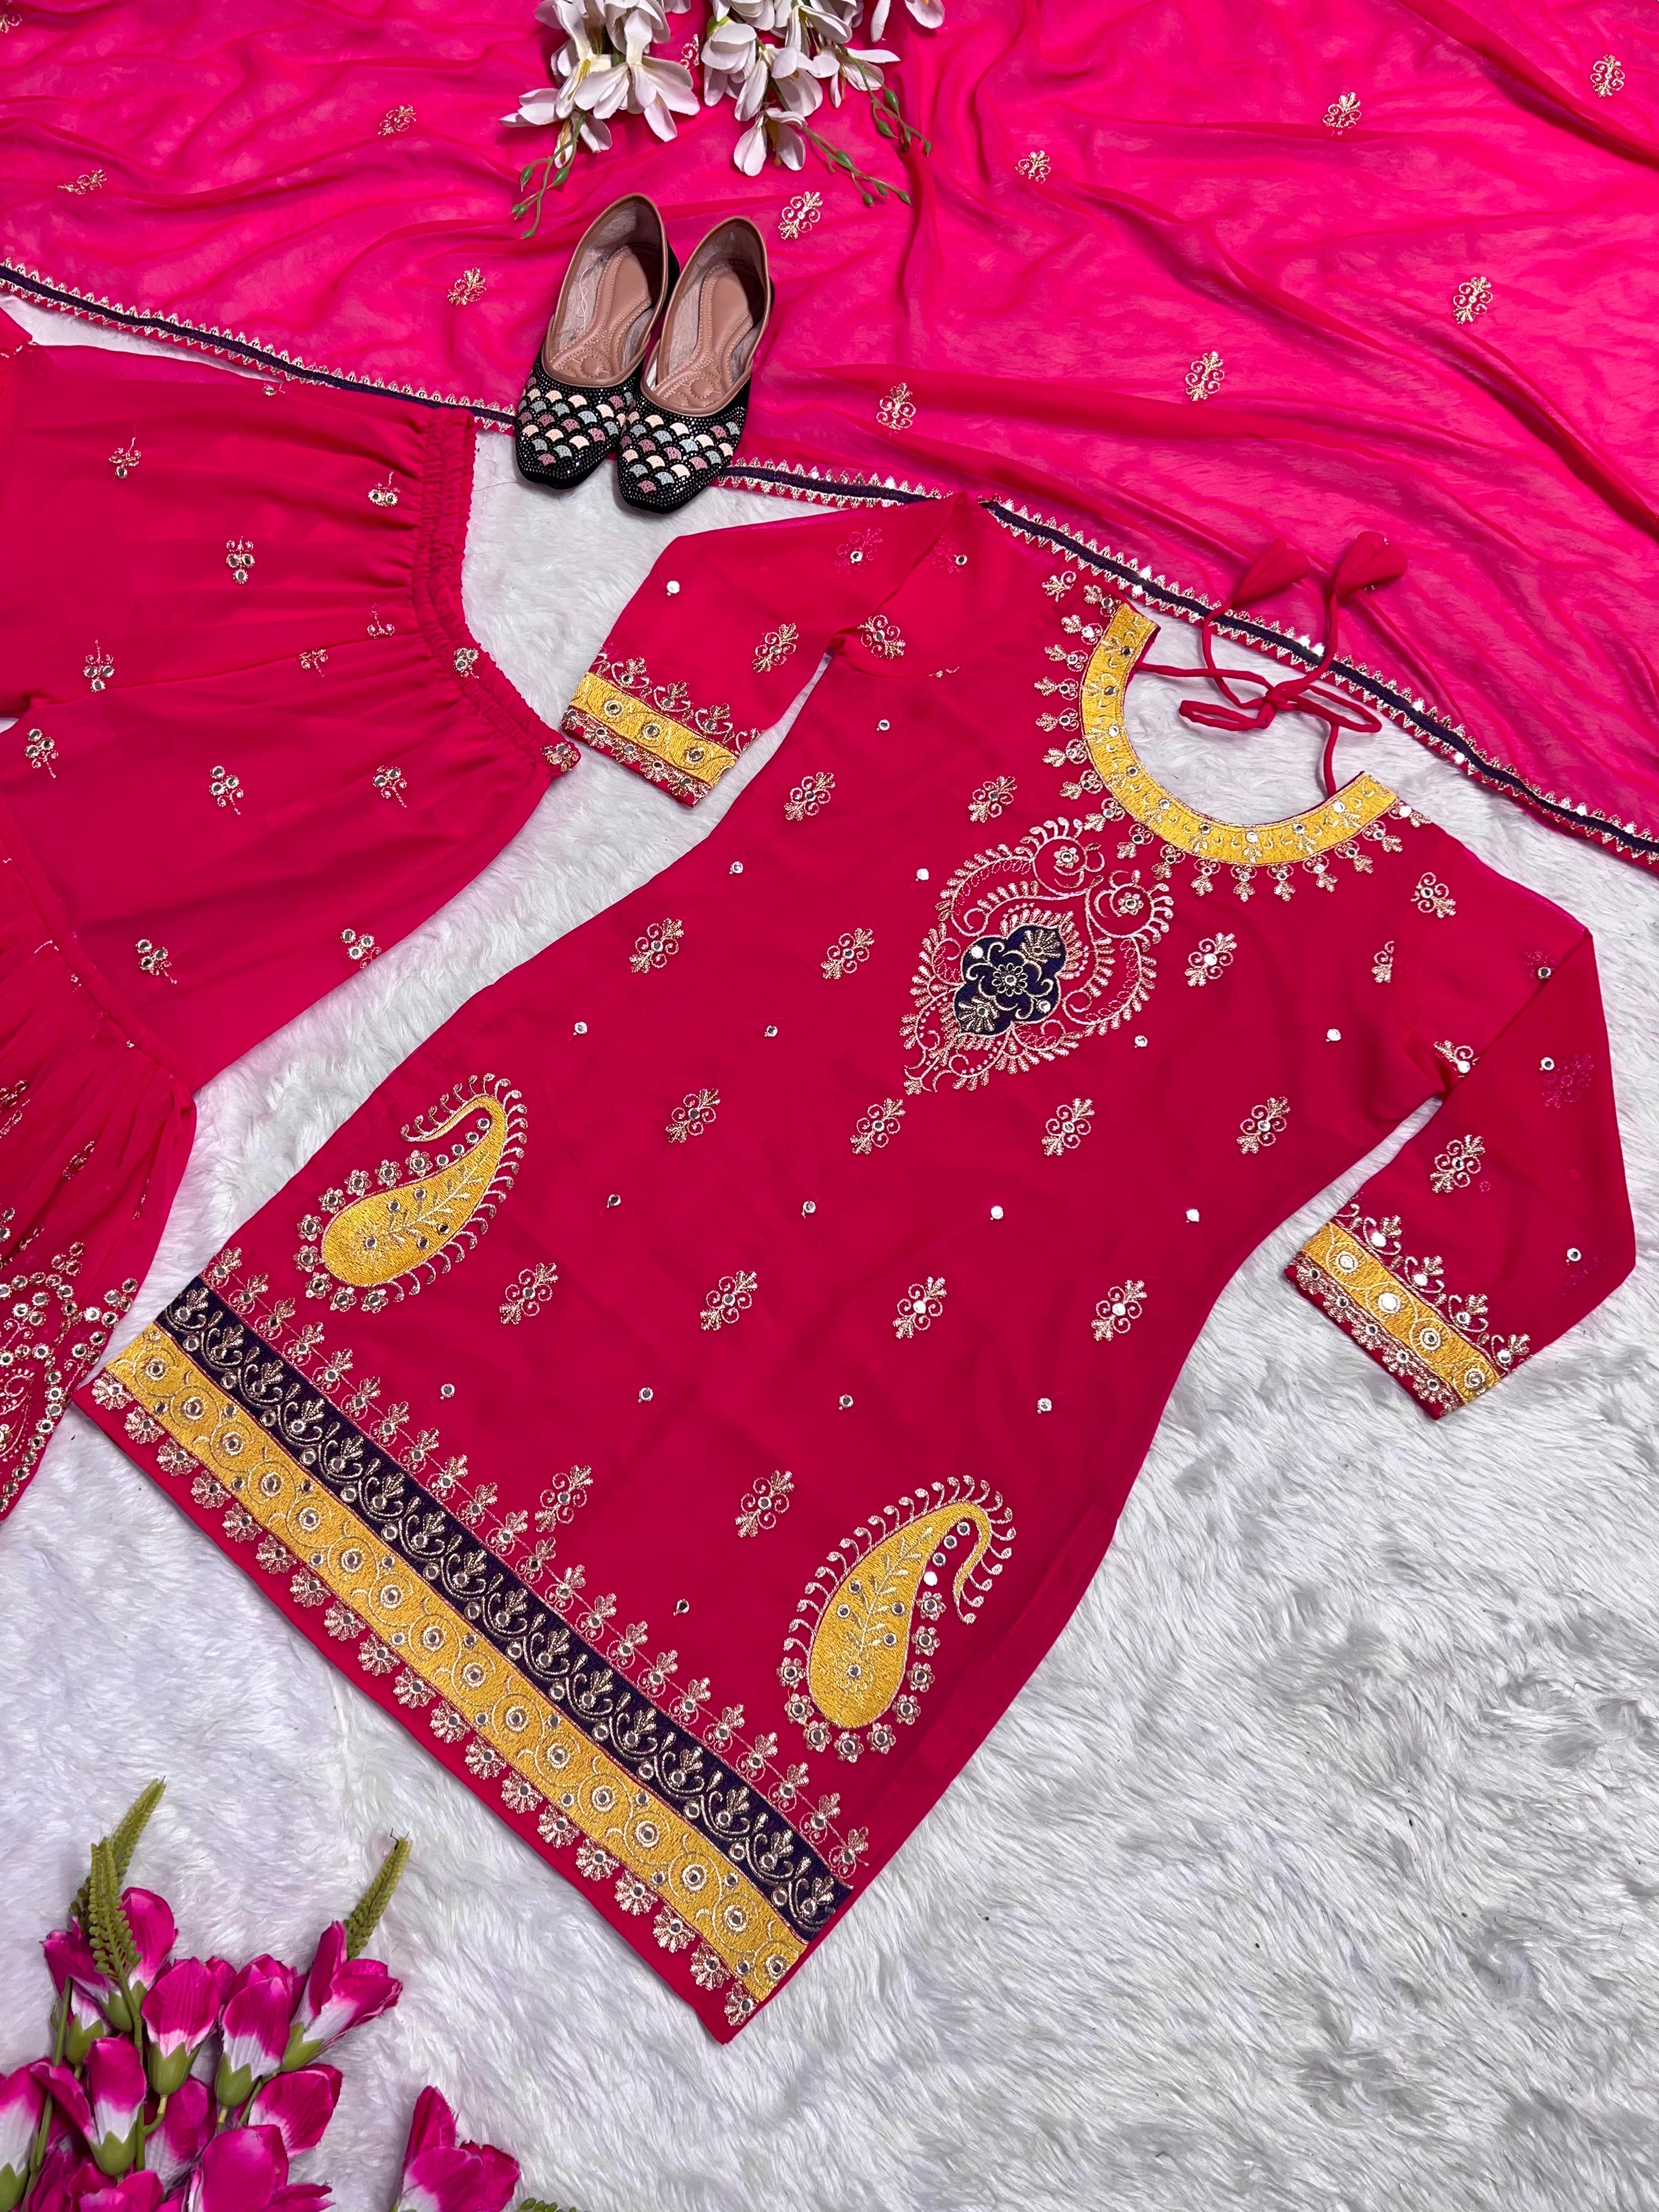 Awesome Multi Embroidery Work Pink Color Sharara Suit